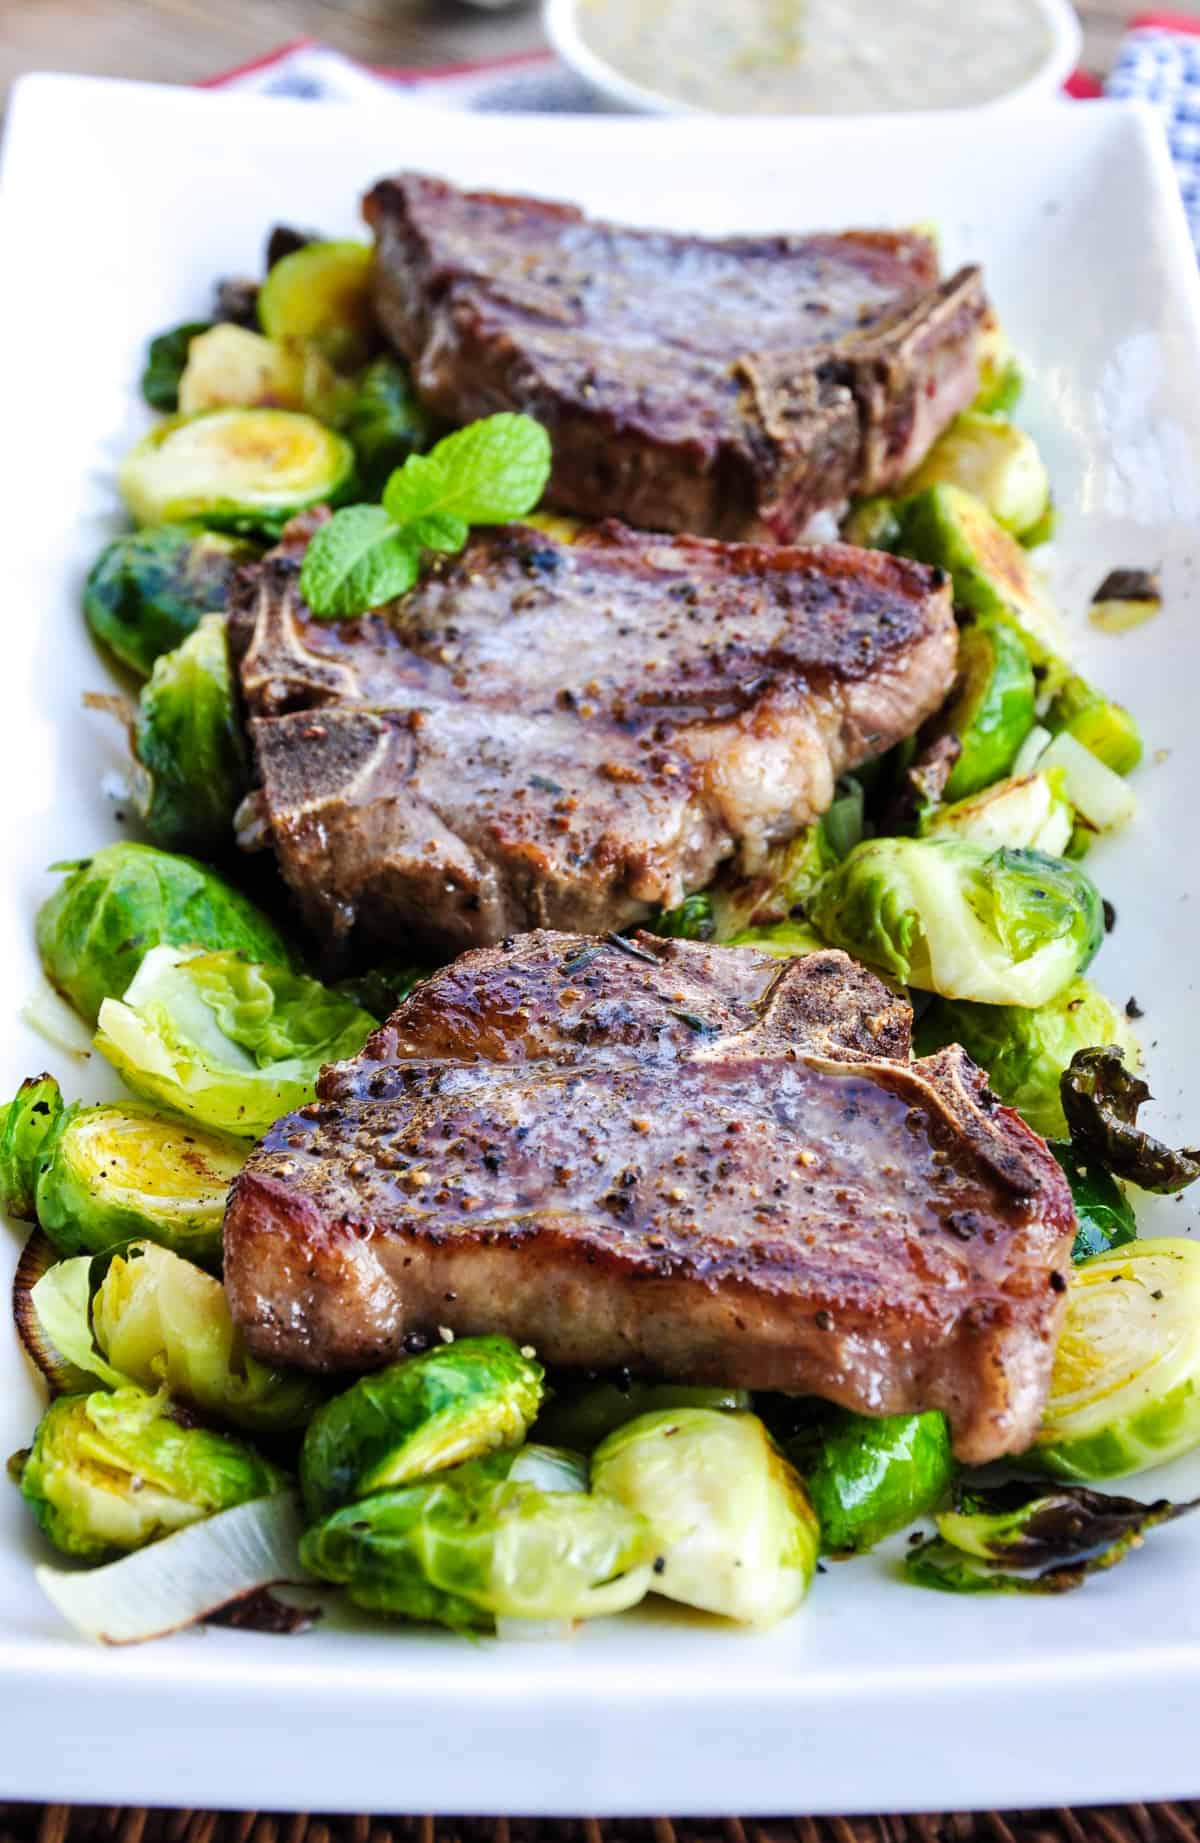 Lamb Loin Chops recipe with Roasted Brussels Sprouts